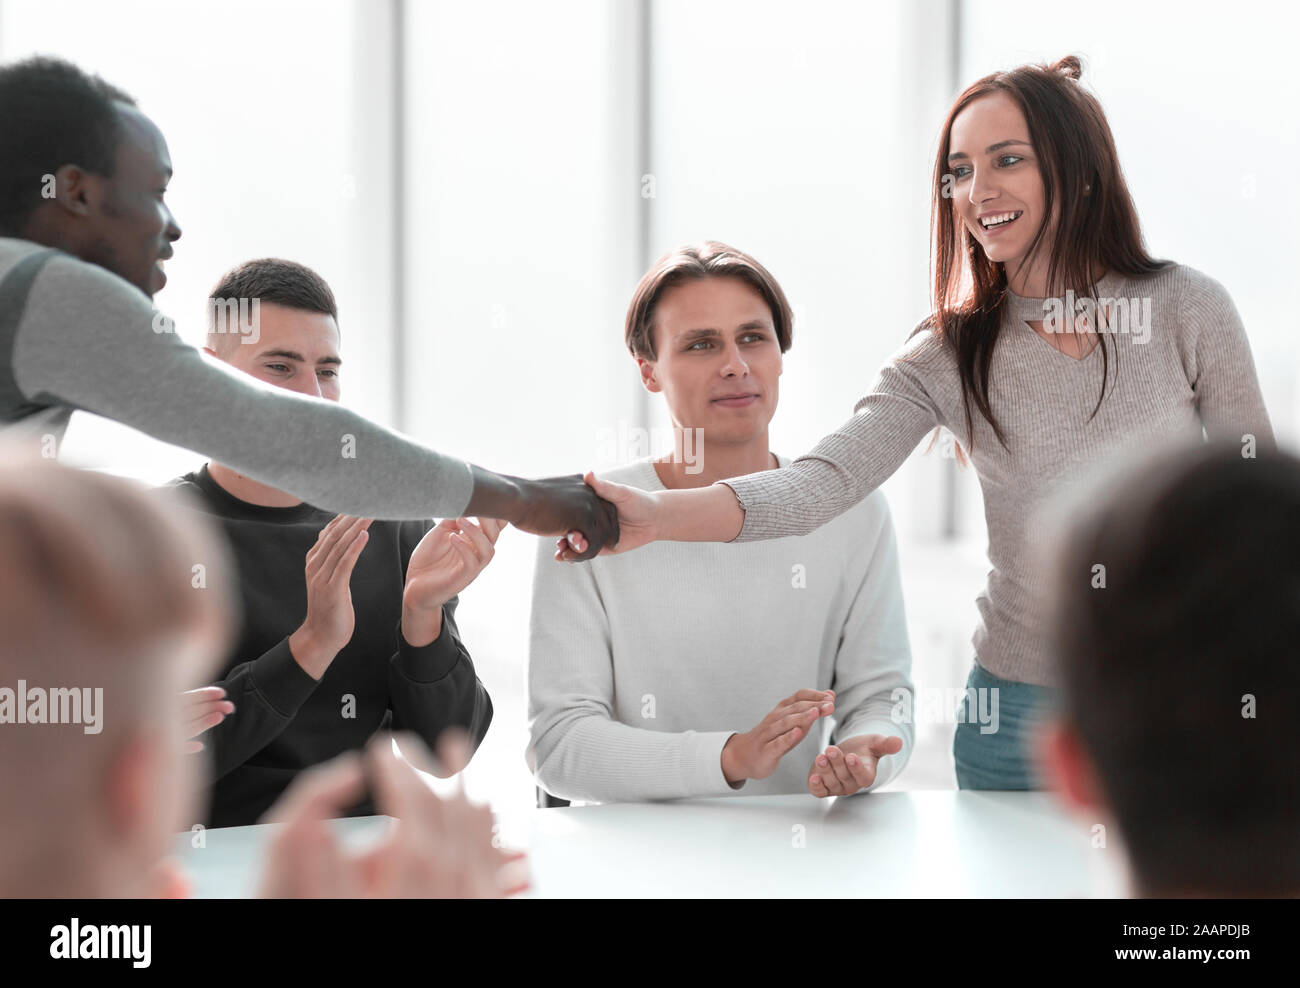 young people greet each other at a group meeting Stock Photo